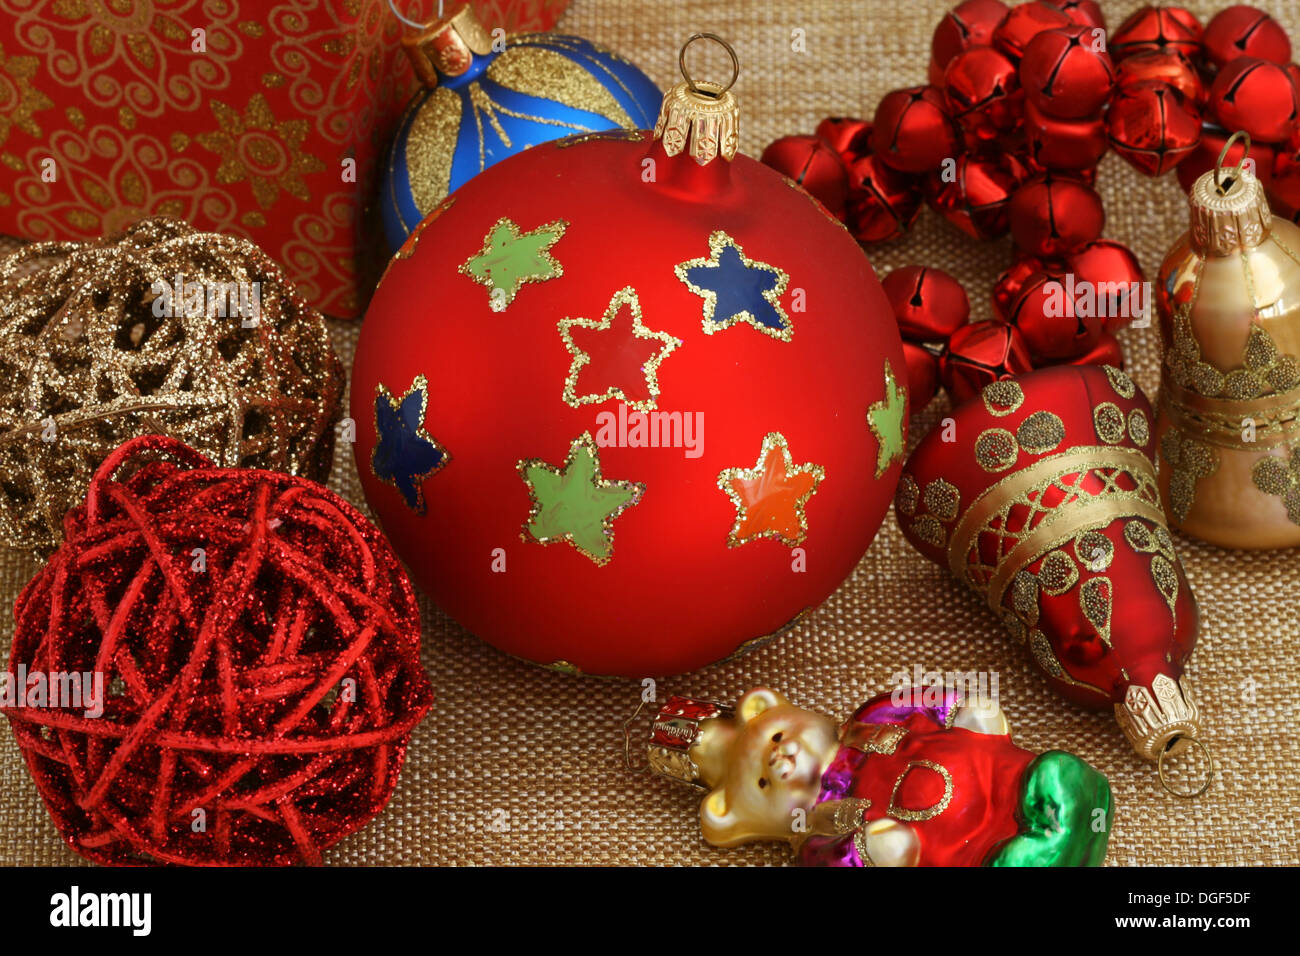 Closeup of Christmas ornaments featuring big red bulb Stock Photo - Alamy